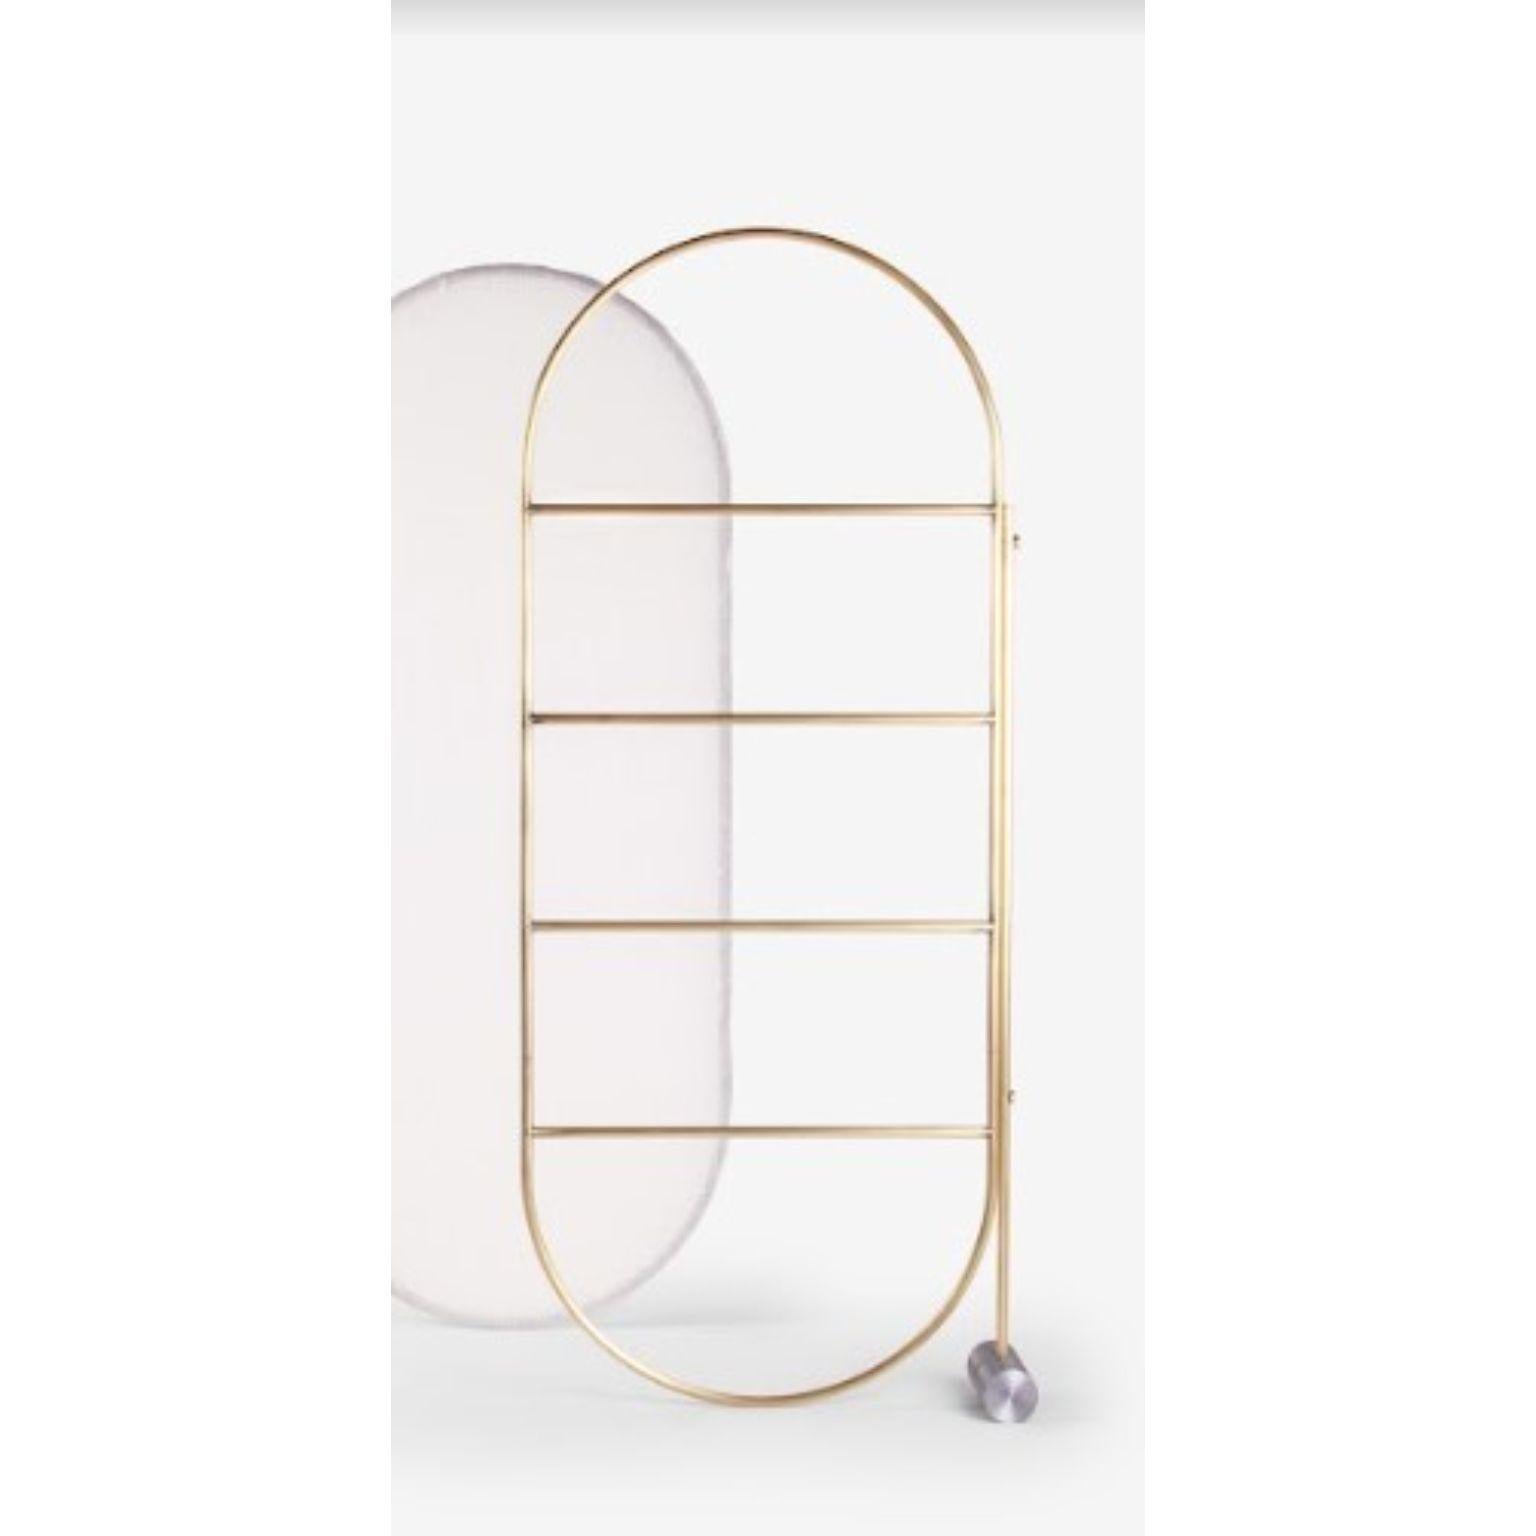 Separè room divider with Horizontal Divisions by Mingardo
Dimensions: D72 x W20 x H170 cm 
Materials: satin natural brass structure. Iron base
Weight: 17 kg

Also Available in different finishes.

Separè, is a multi-use space divider,